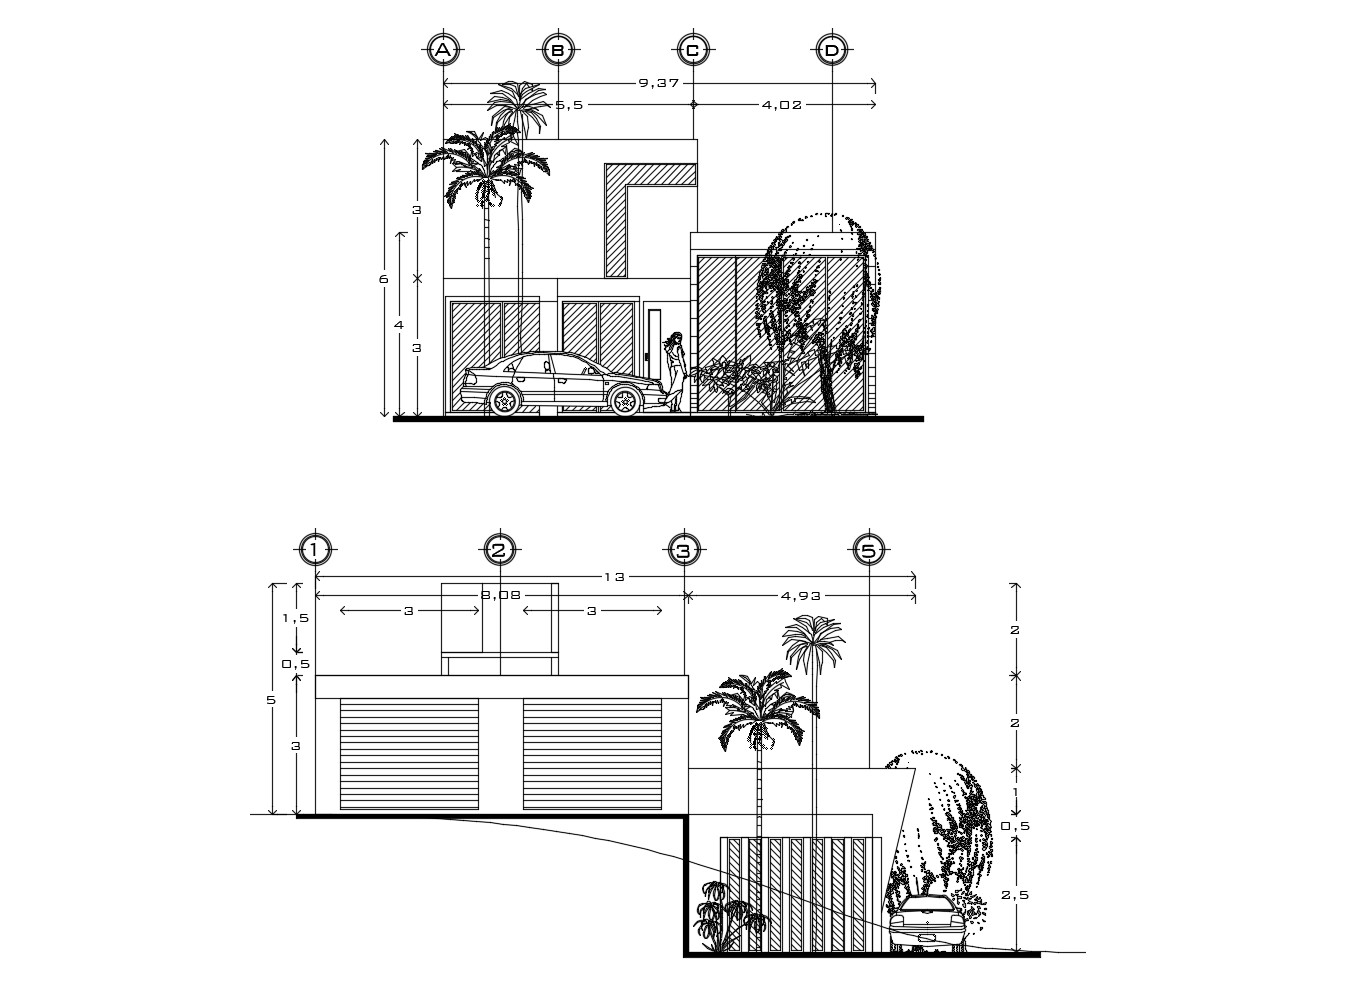 Bungalow elevation plan in AutoCAD file Cadbull